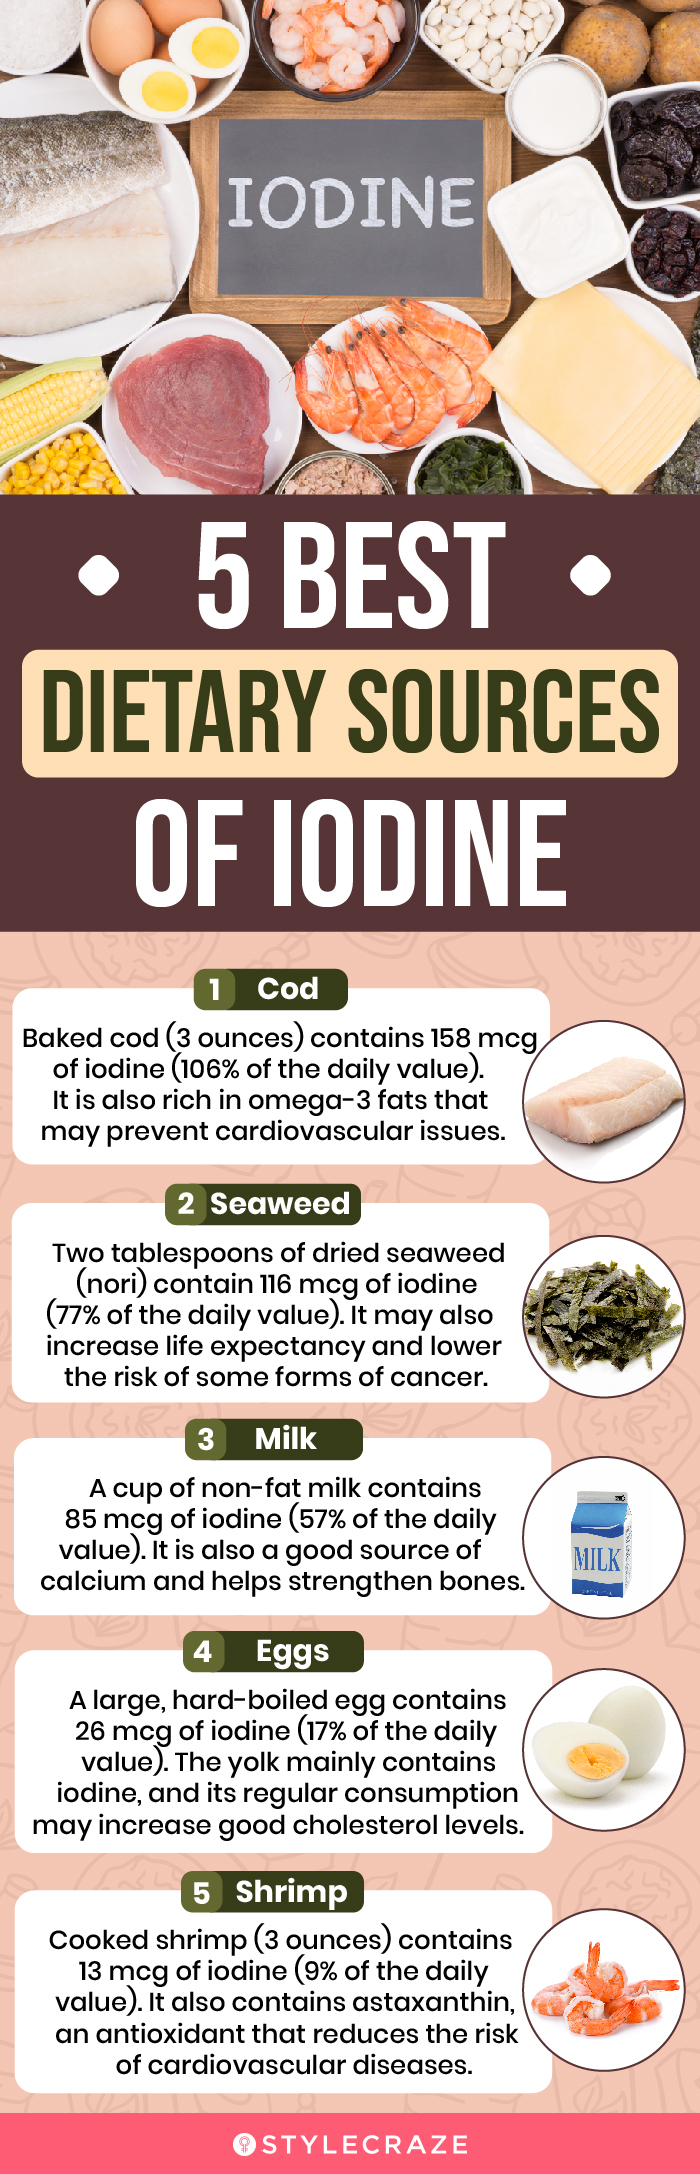 V. The Link Between Iodine Deficiency and Thyroid Disorders